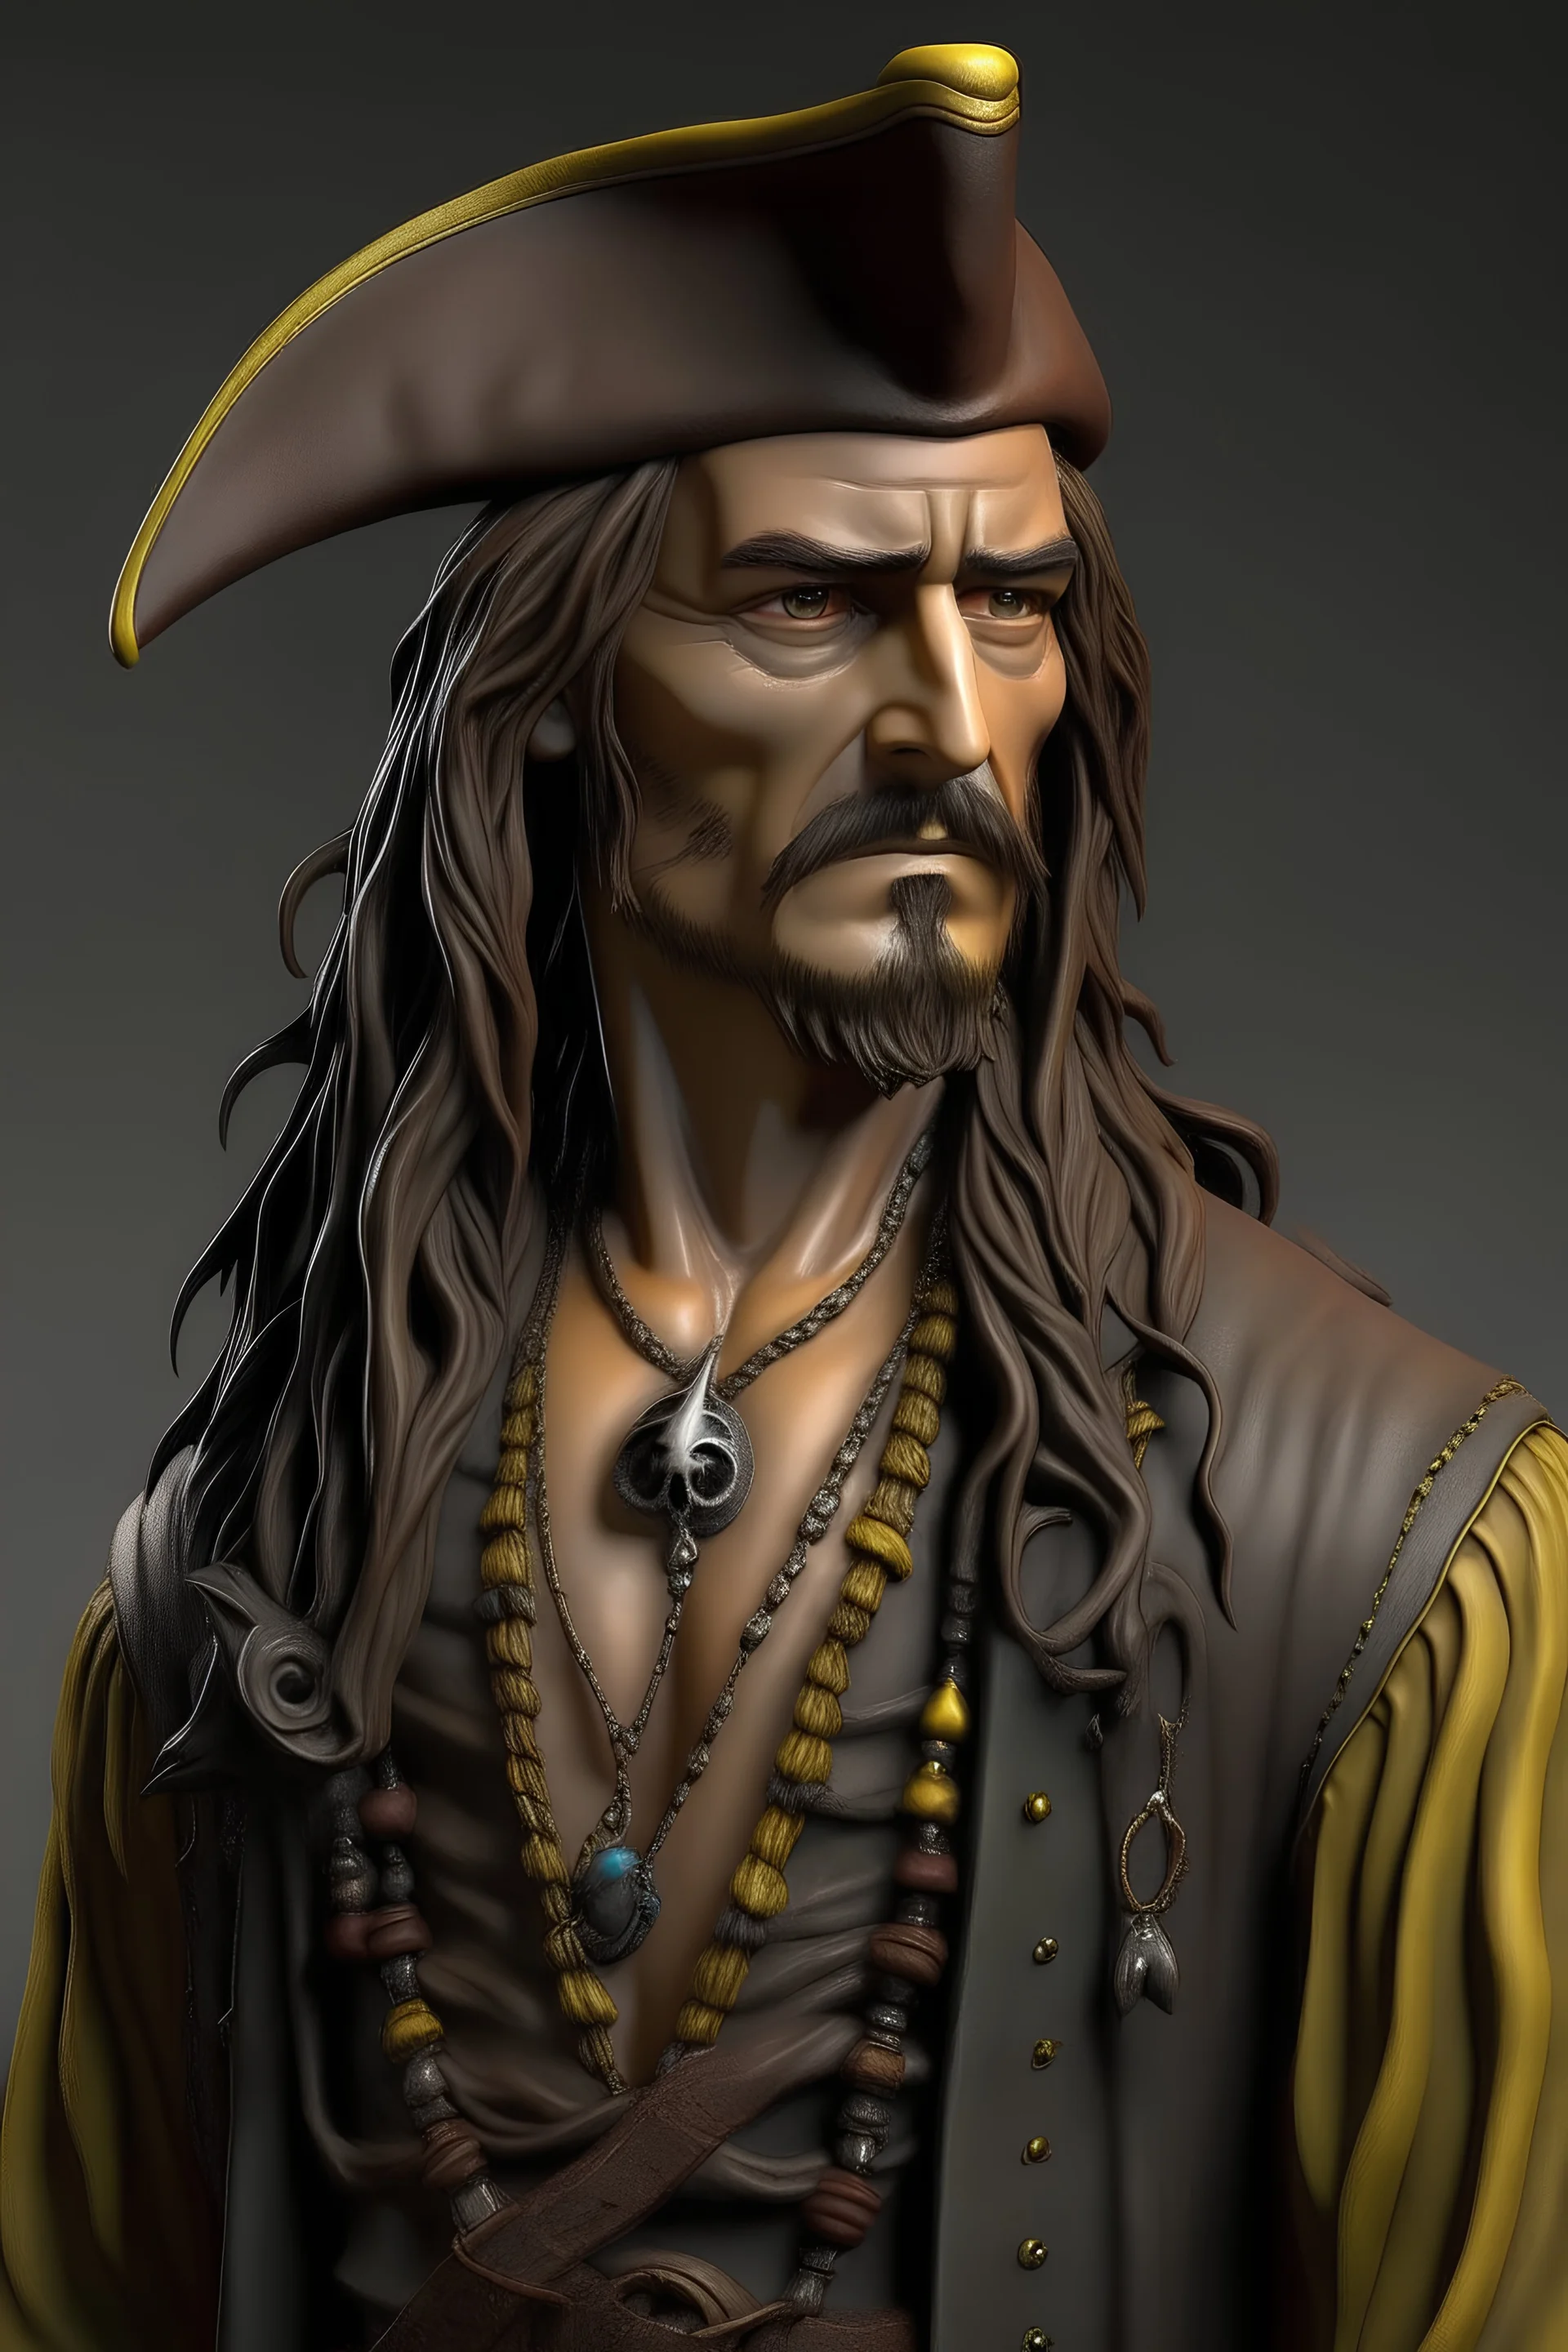 30 years old Jack Sparrow pirate, half body height ultra realistic